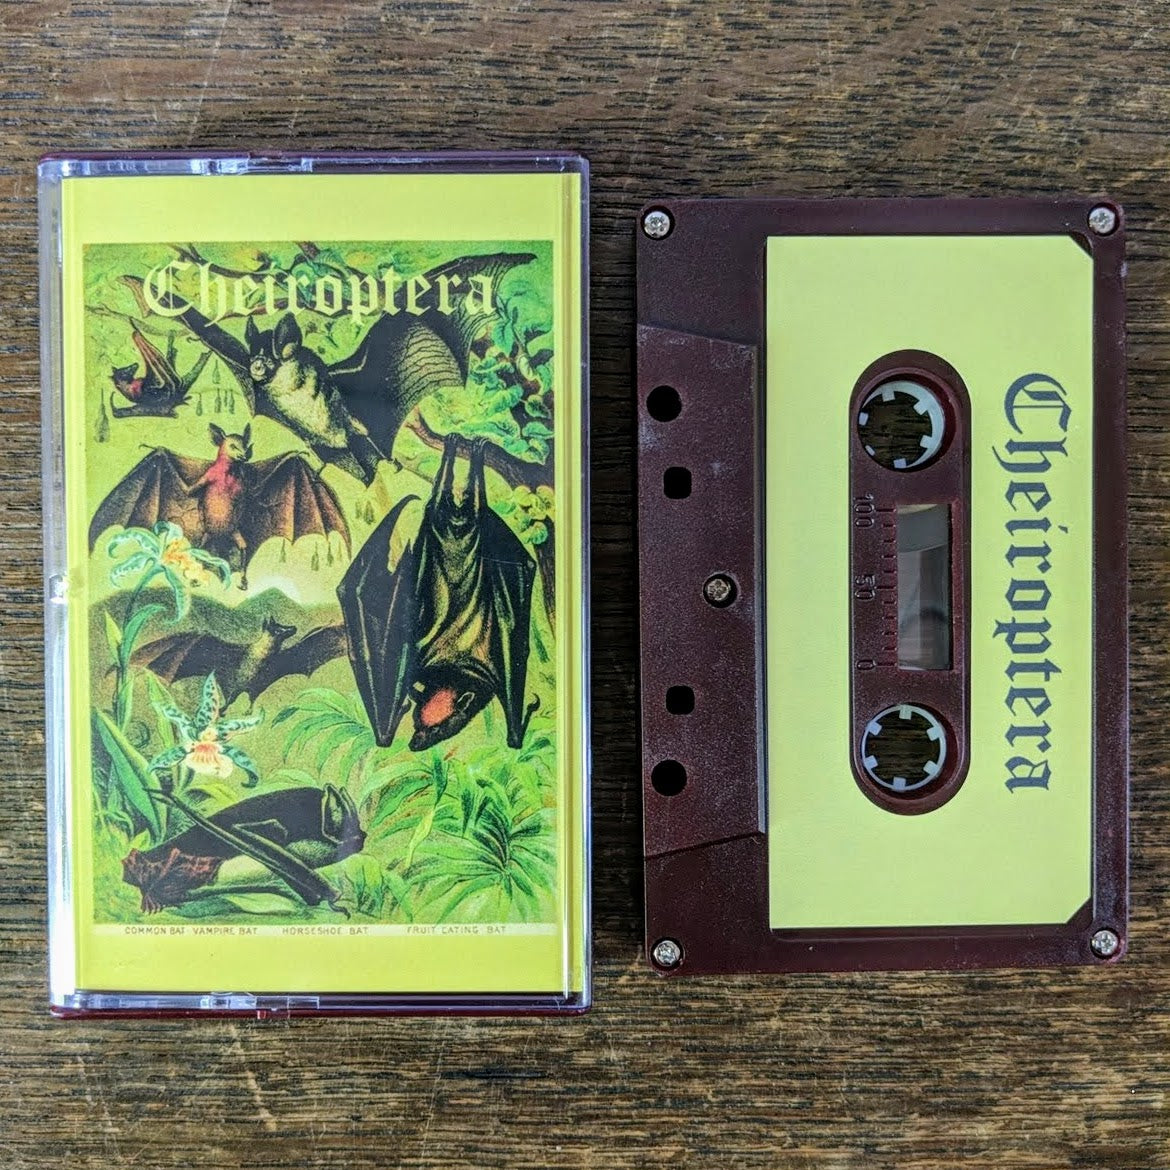 [SOLD OUT] CHEIROPTERA "Cheiroptera" Cassette Tape